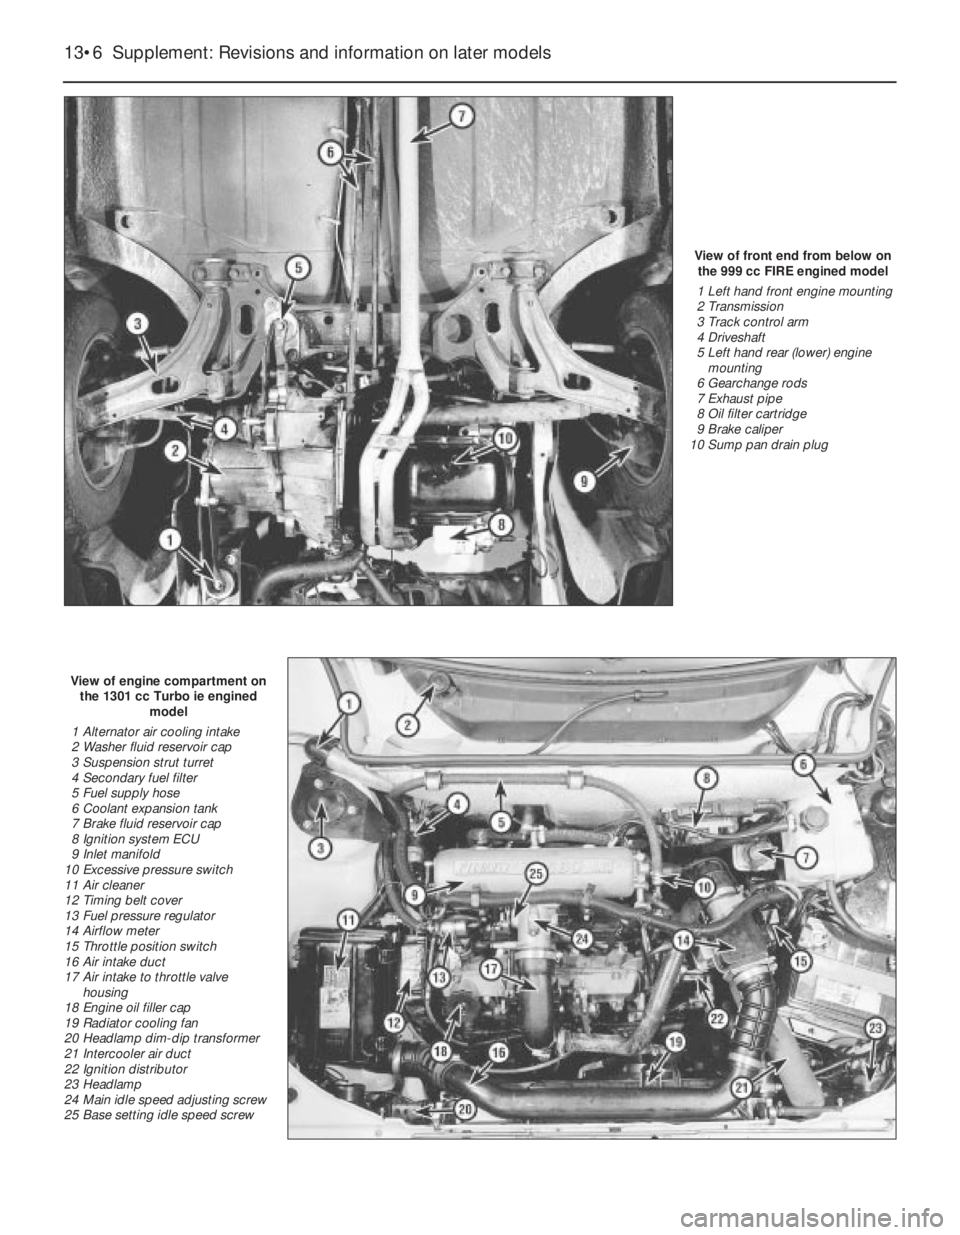 FIAT UNO 1983  Service Repair Manual View of front end from below on
the 999 cc FIRE engined model
1 Left hand front engine mounting
2 Transmission
3 Track control arm
4 Driveshaft
5 Left hand rear (lower) engine
mounting
6 Gearchange ro